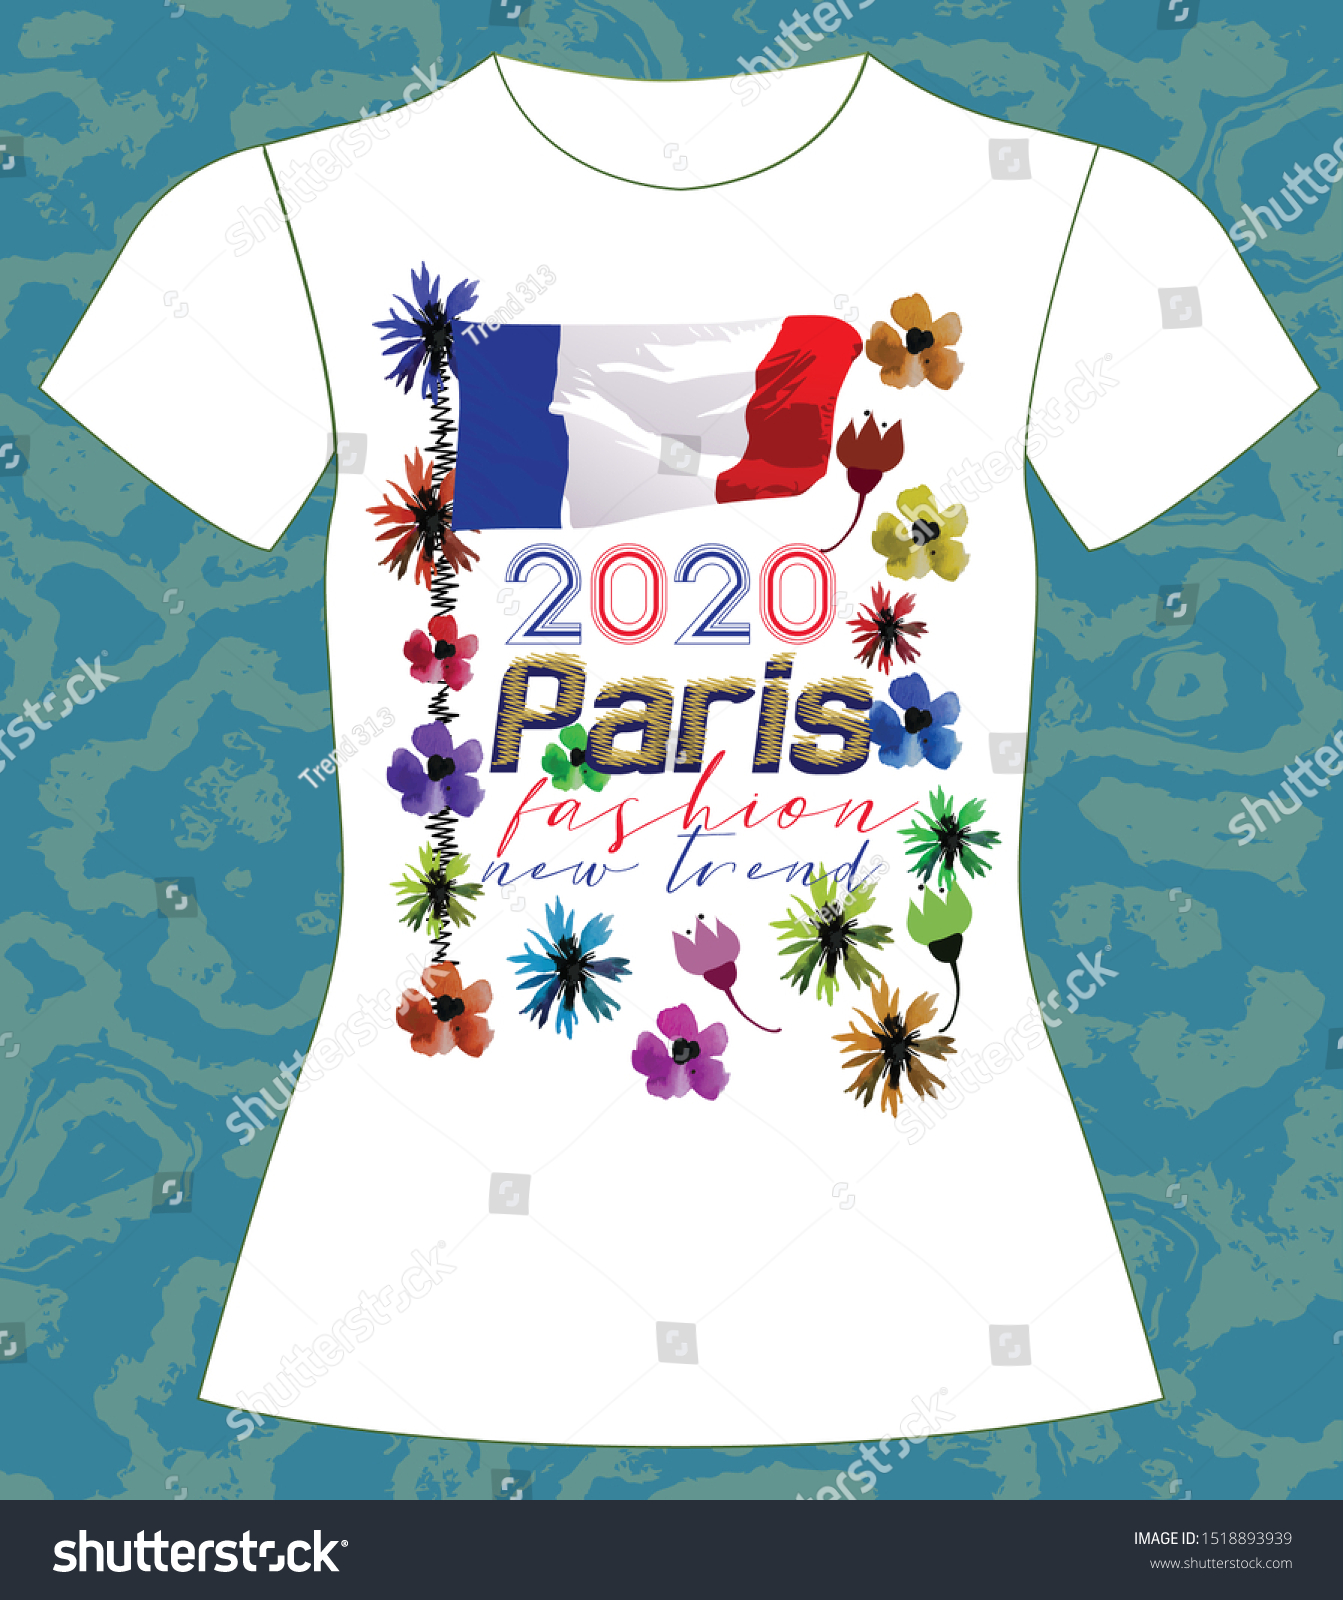 Tshirt Girl 2020 Paris Fashion New Stock Vector Royalty Free 1518893939,Embroidery Blouse Neck Designs For Silk Saree